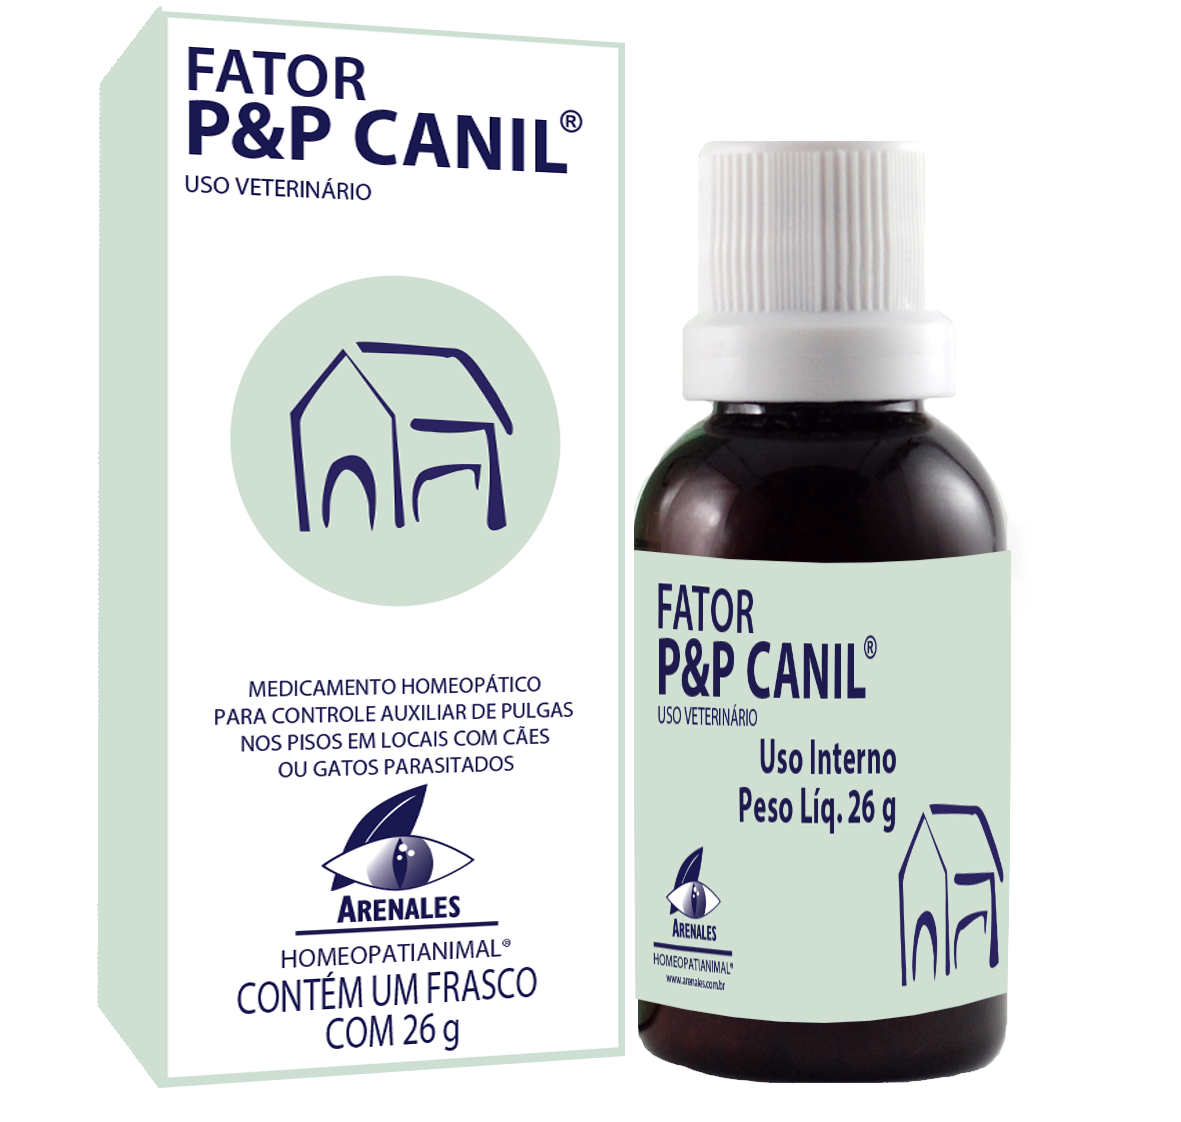 Fator P&P Canil® - Arenales Homeopatia Animal